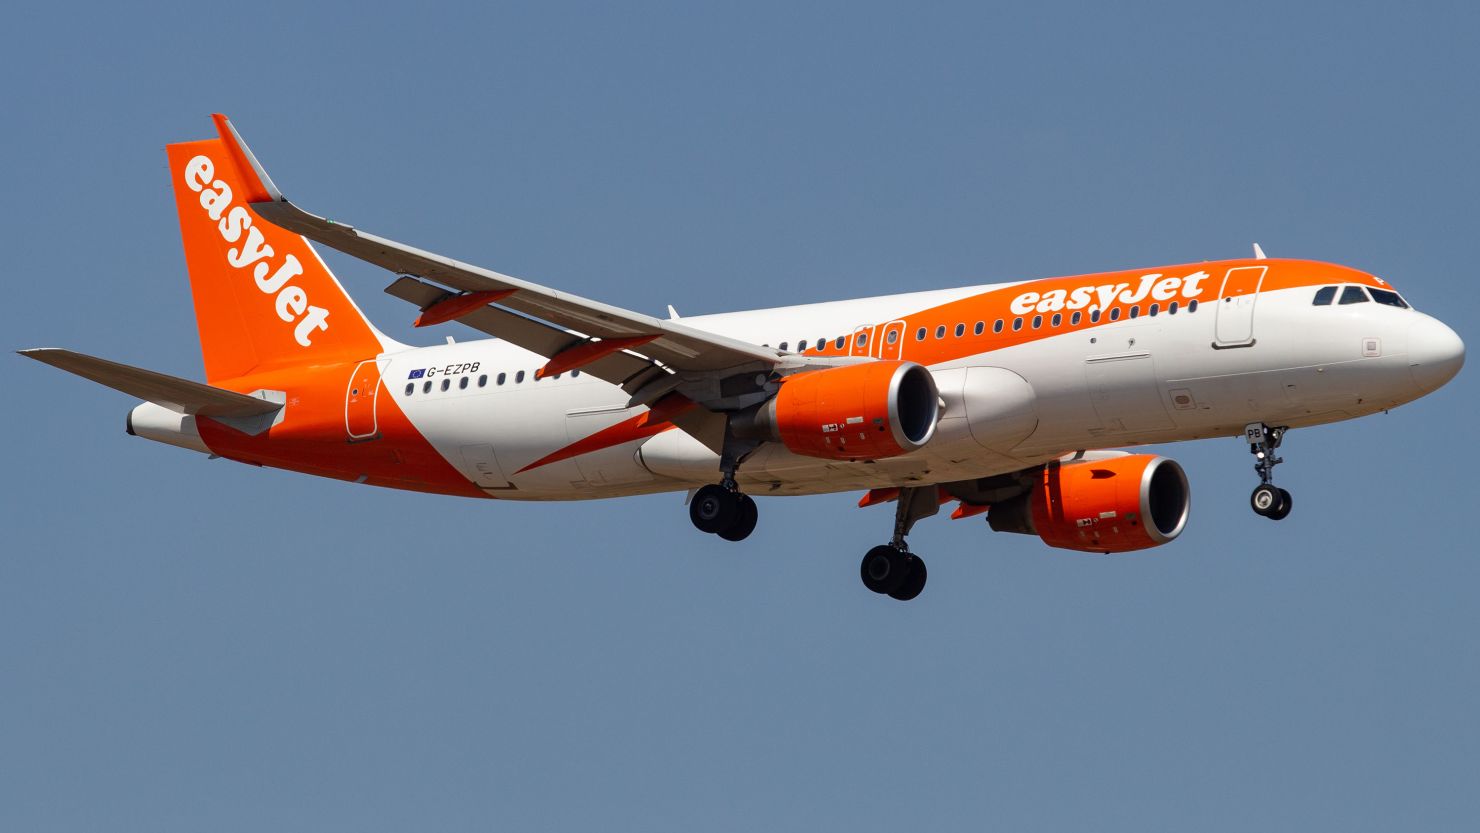 EasyJet says it wants its staff to be "friendly" and "inclusive" to passengers